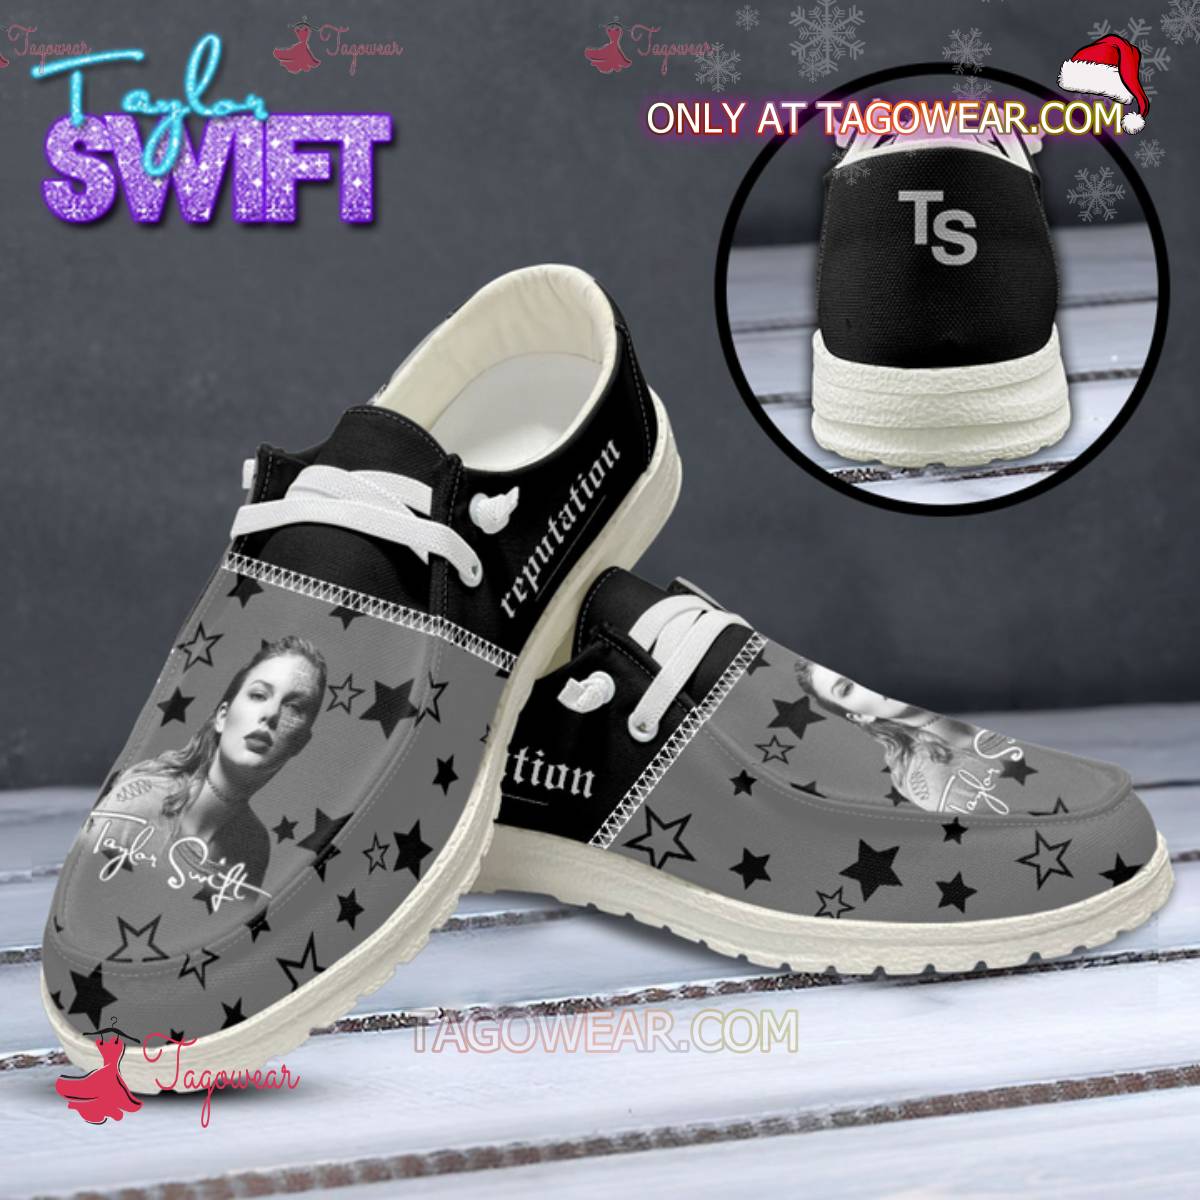 Taylor Swift Reputation Hey Dude Shoes